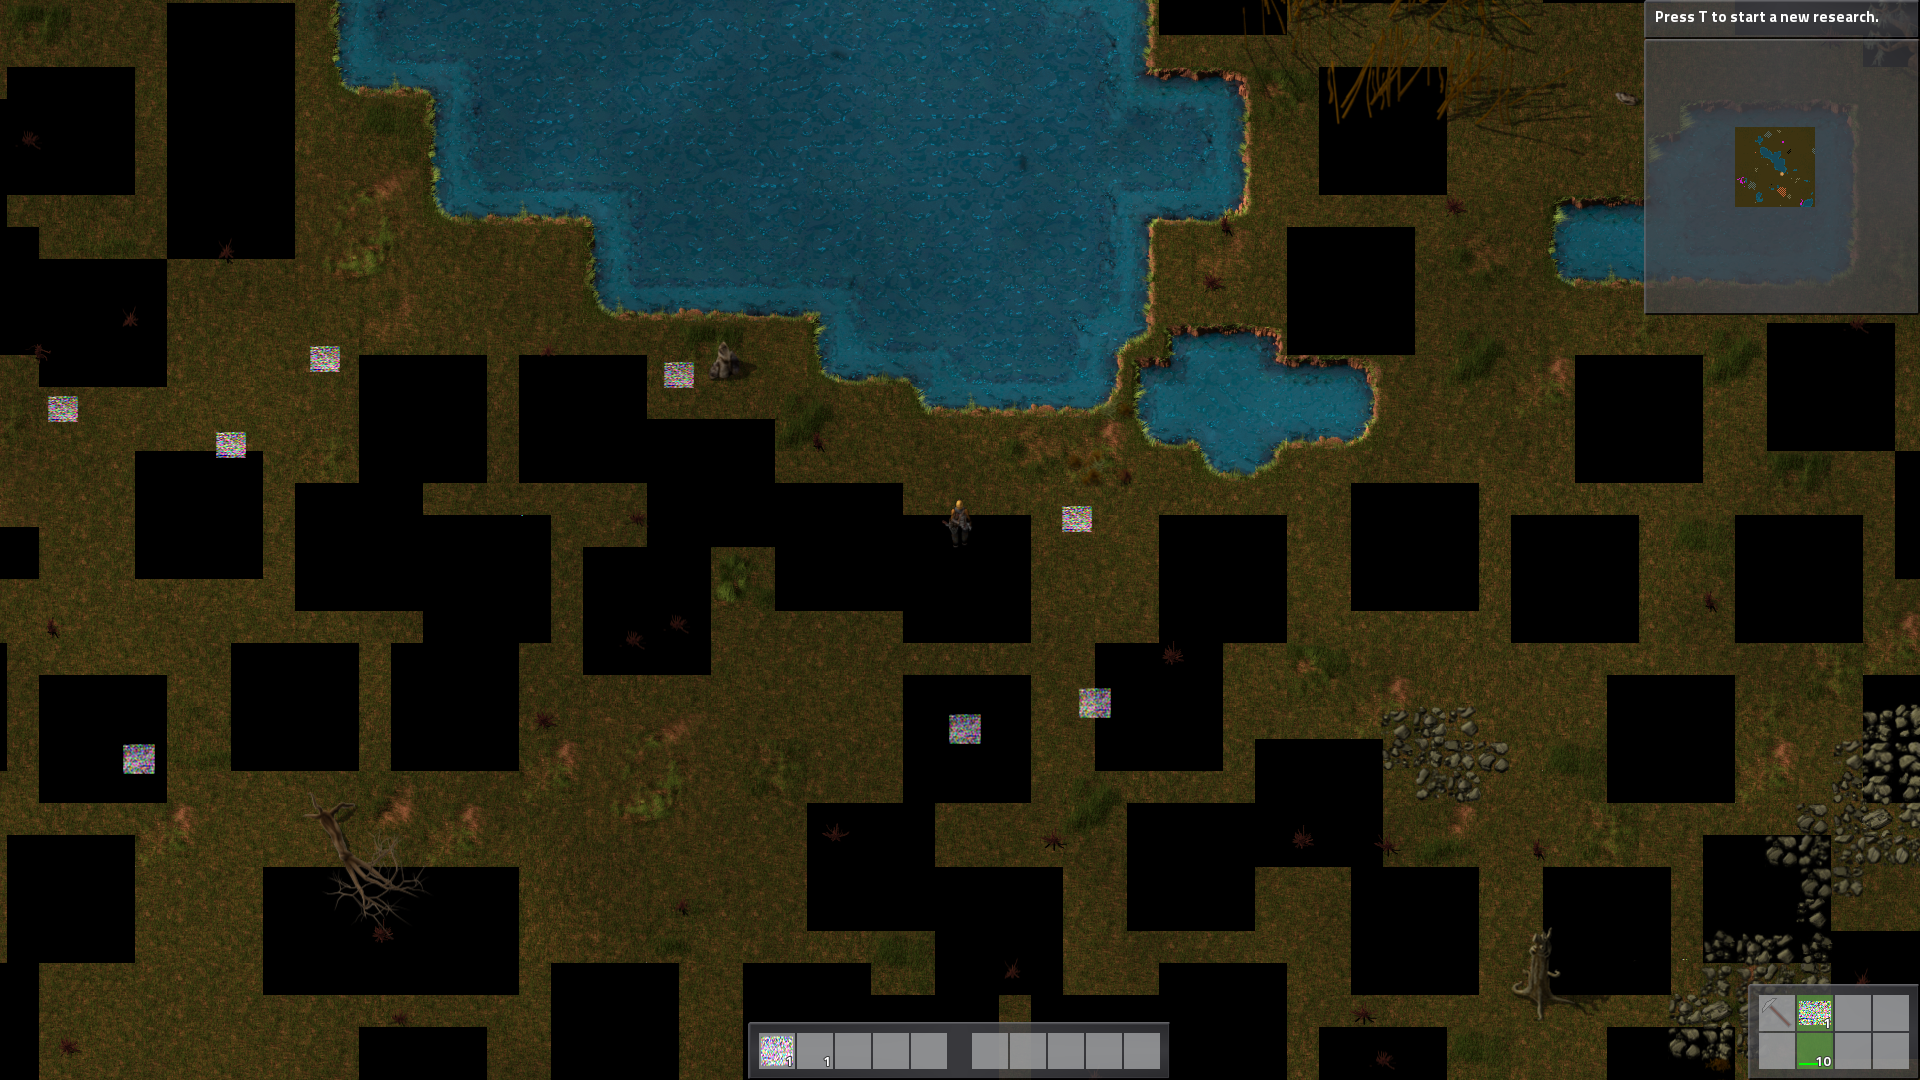 factorio graphic glitch at new game start without moving or pressing anything.